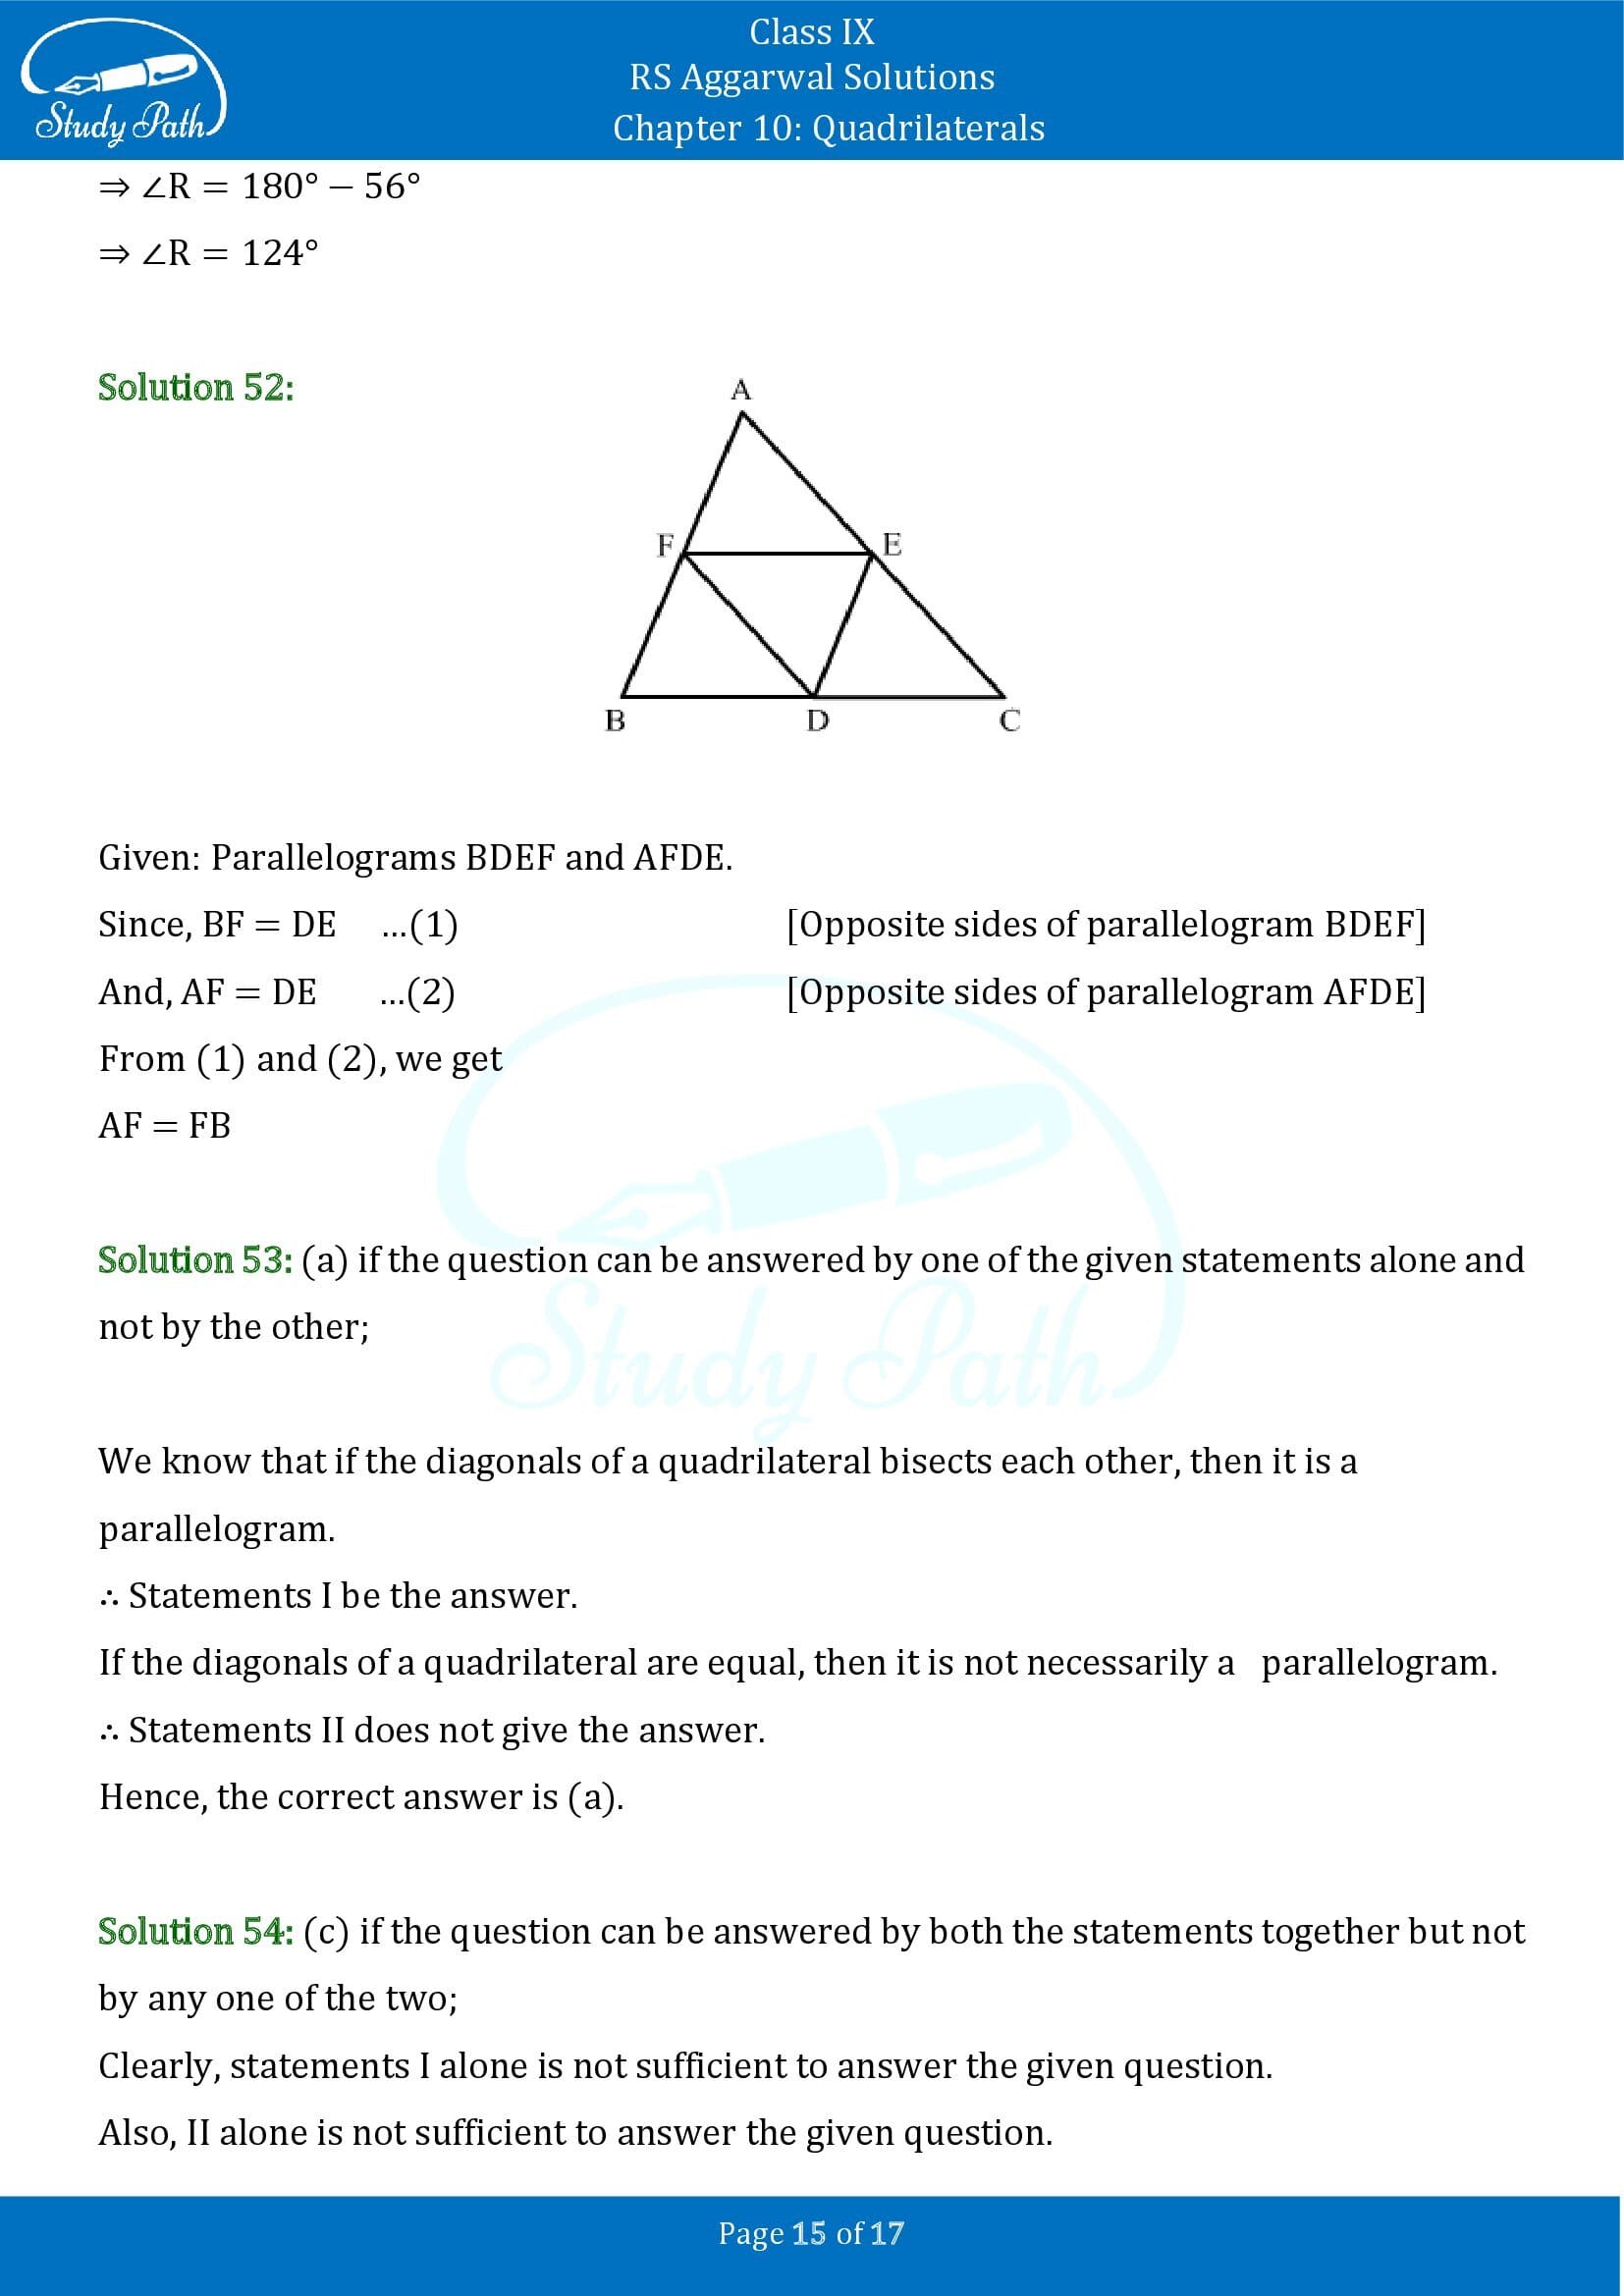 RS Aggarwal Solutions Class 9 Chapter 10 Quadrilaterals Multiple Choice Questions MCQs 00015